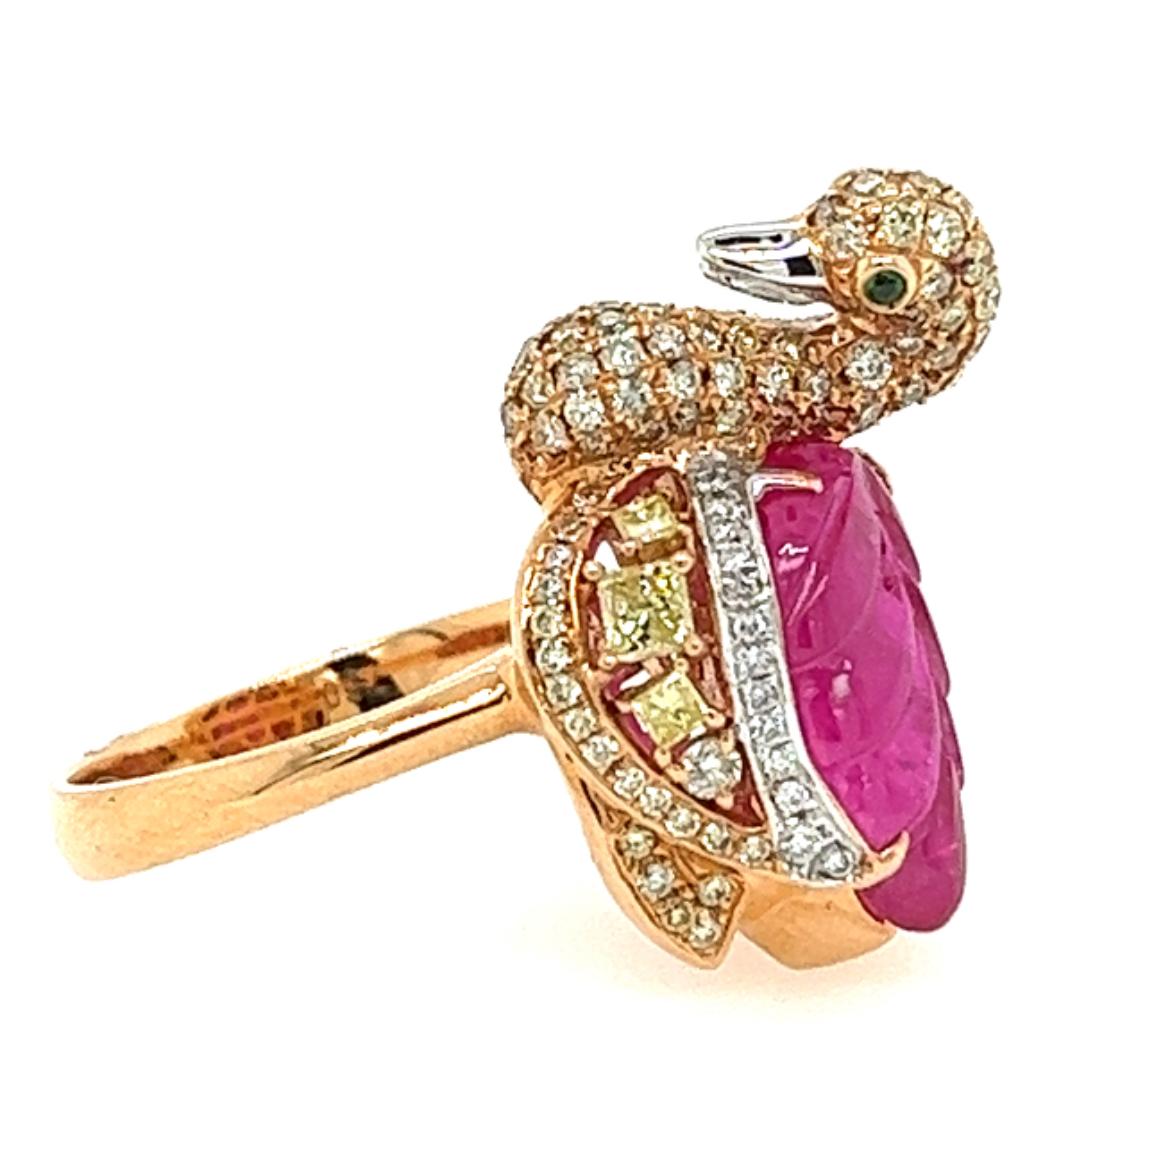 18K Rose Gold Ruby Swan Ring with Diamonds

157 Diamonds - 0.97 CT
2 Green Garnets - 0.02 CT
1 Ruby -  4.51 CT
6 Yellow Diamonds - 0.37 CT
18K Rose Gold - 7.75 GM

This captivating 18K rose gold ring features a breathtaking ruby at its center,